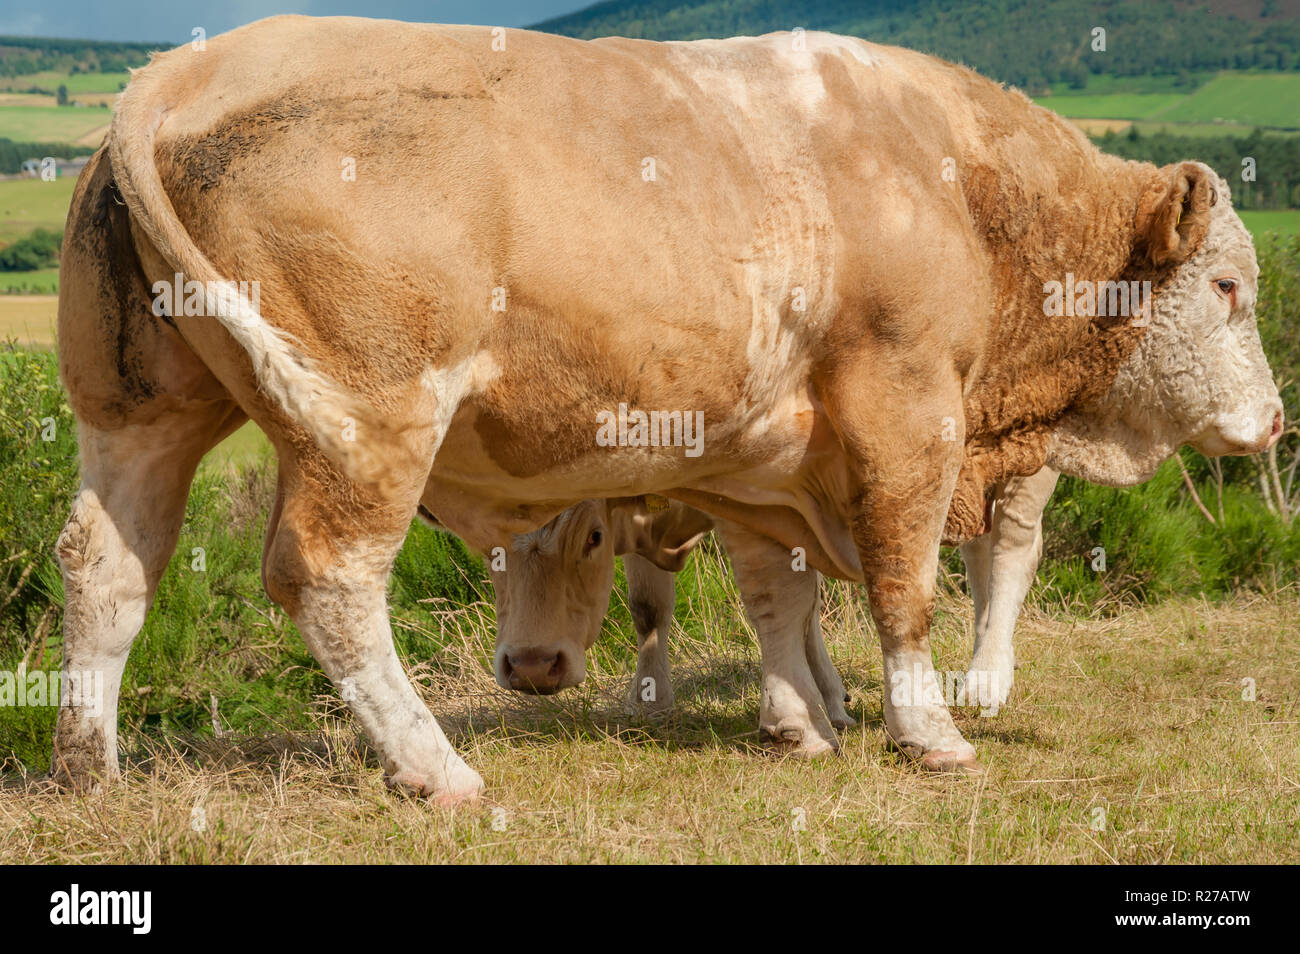 Huge Simmental bull sheltering small heifer calf that is hiding behind it and looking out at camera from underneath in a summer pasture in Scotland Stock Photo